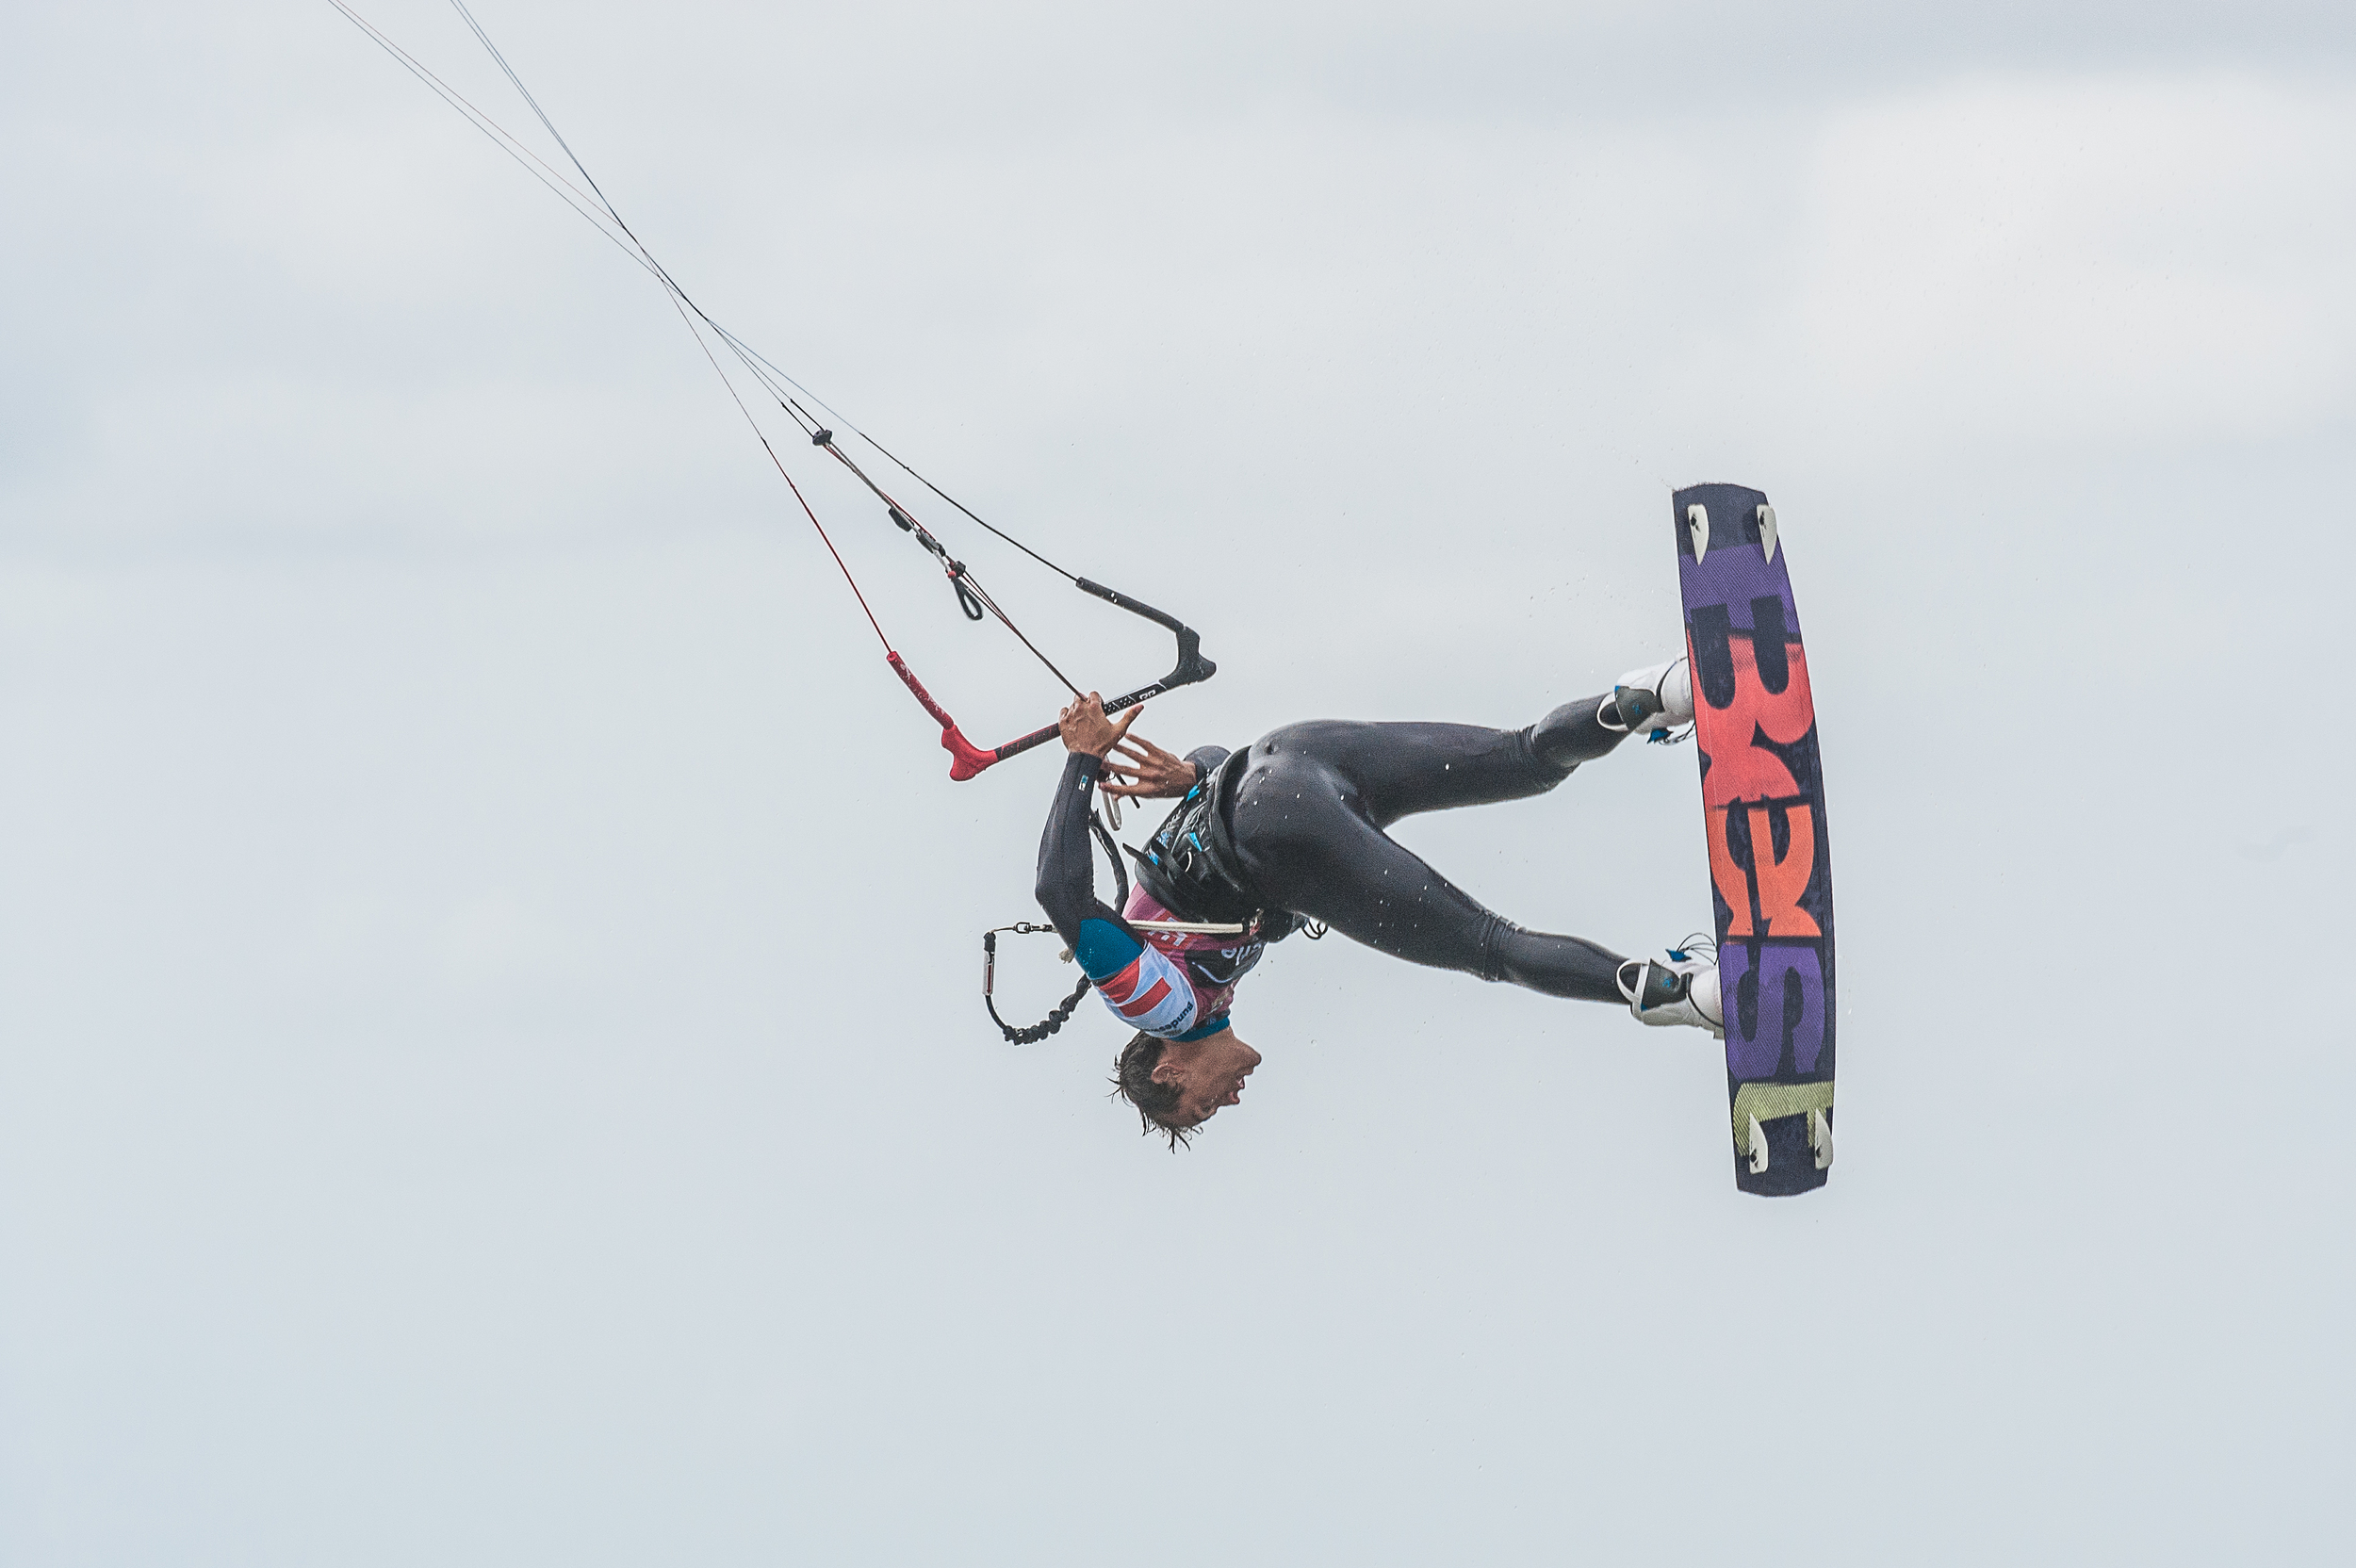 Kite Surf World Cup, St.Peter Ording, Germany